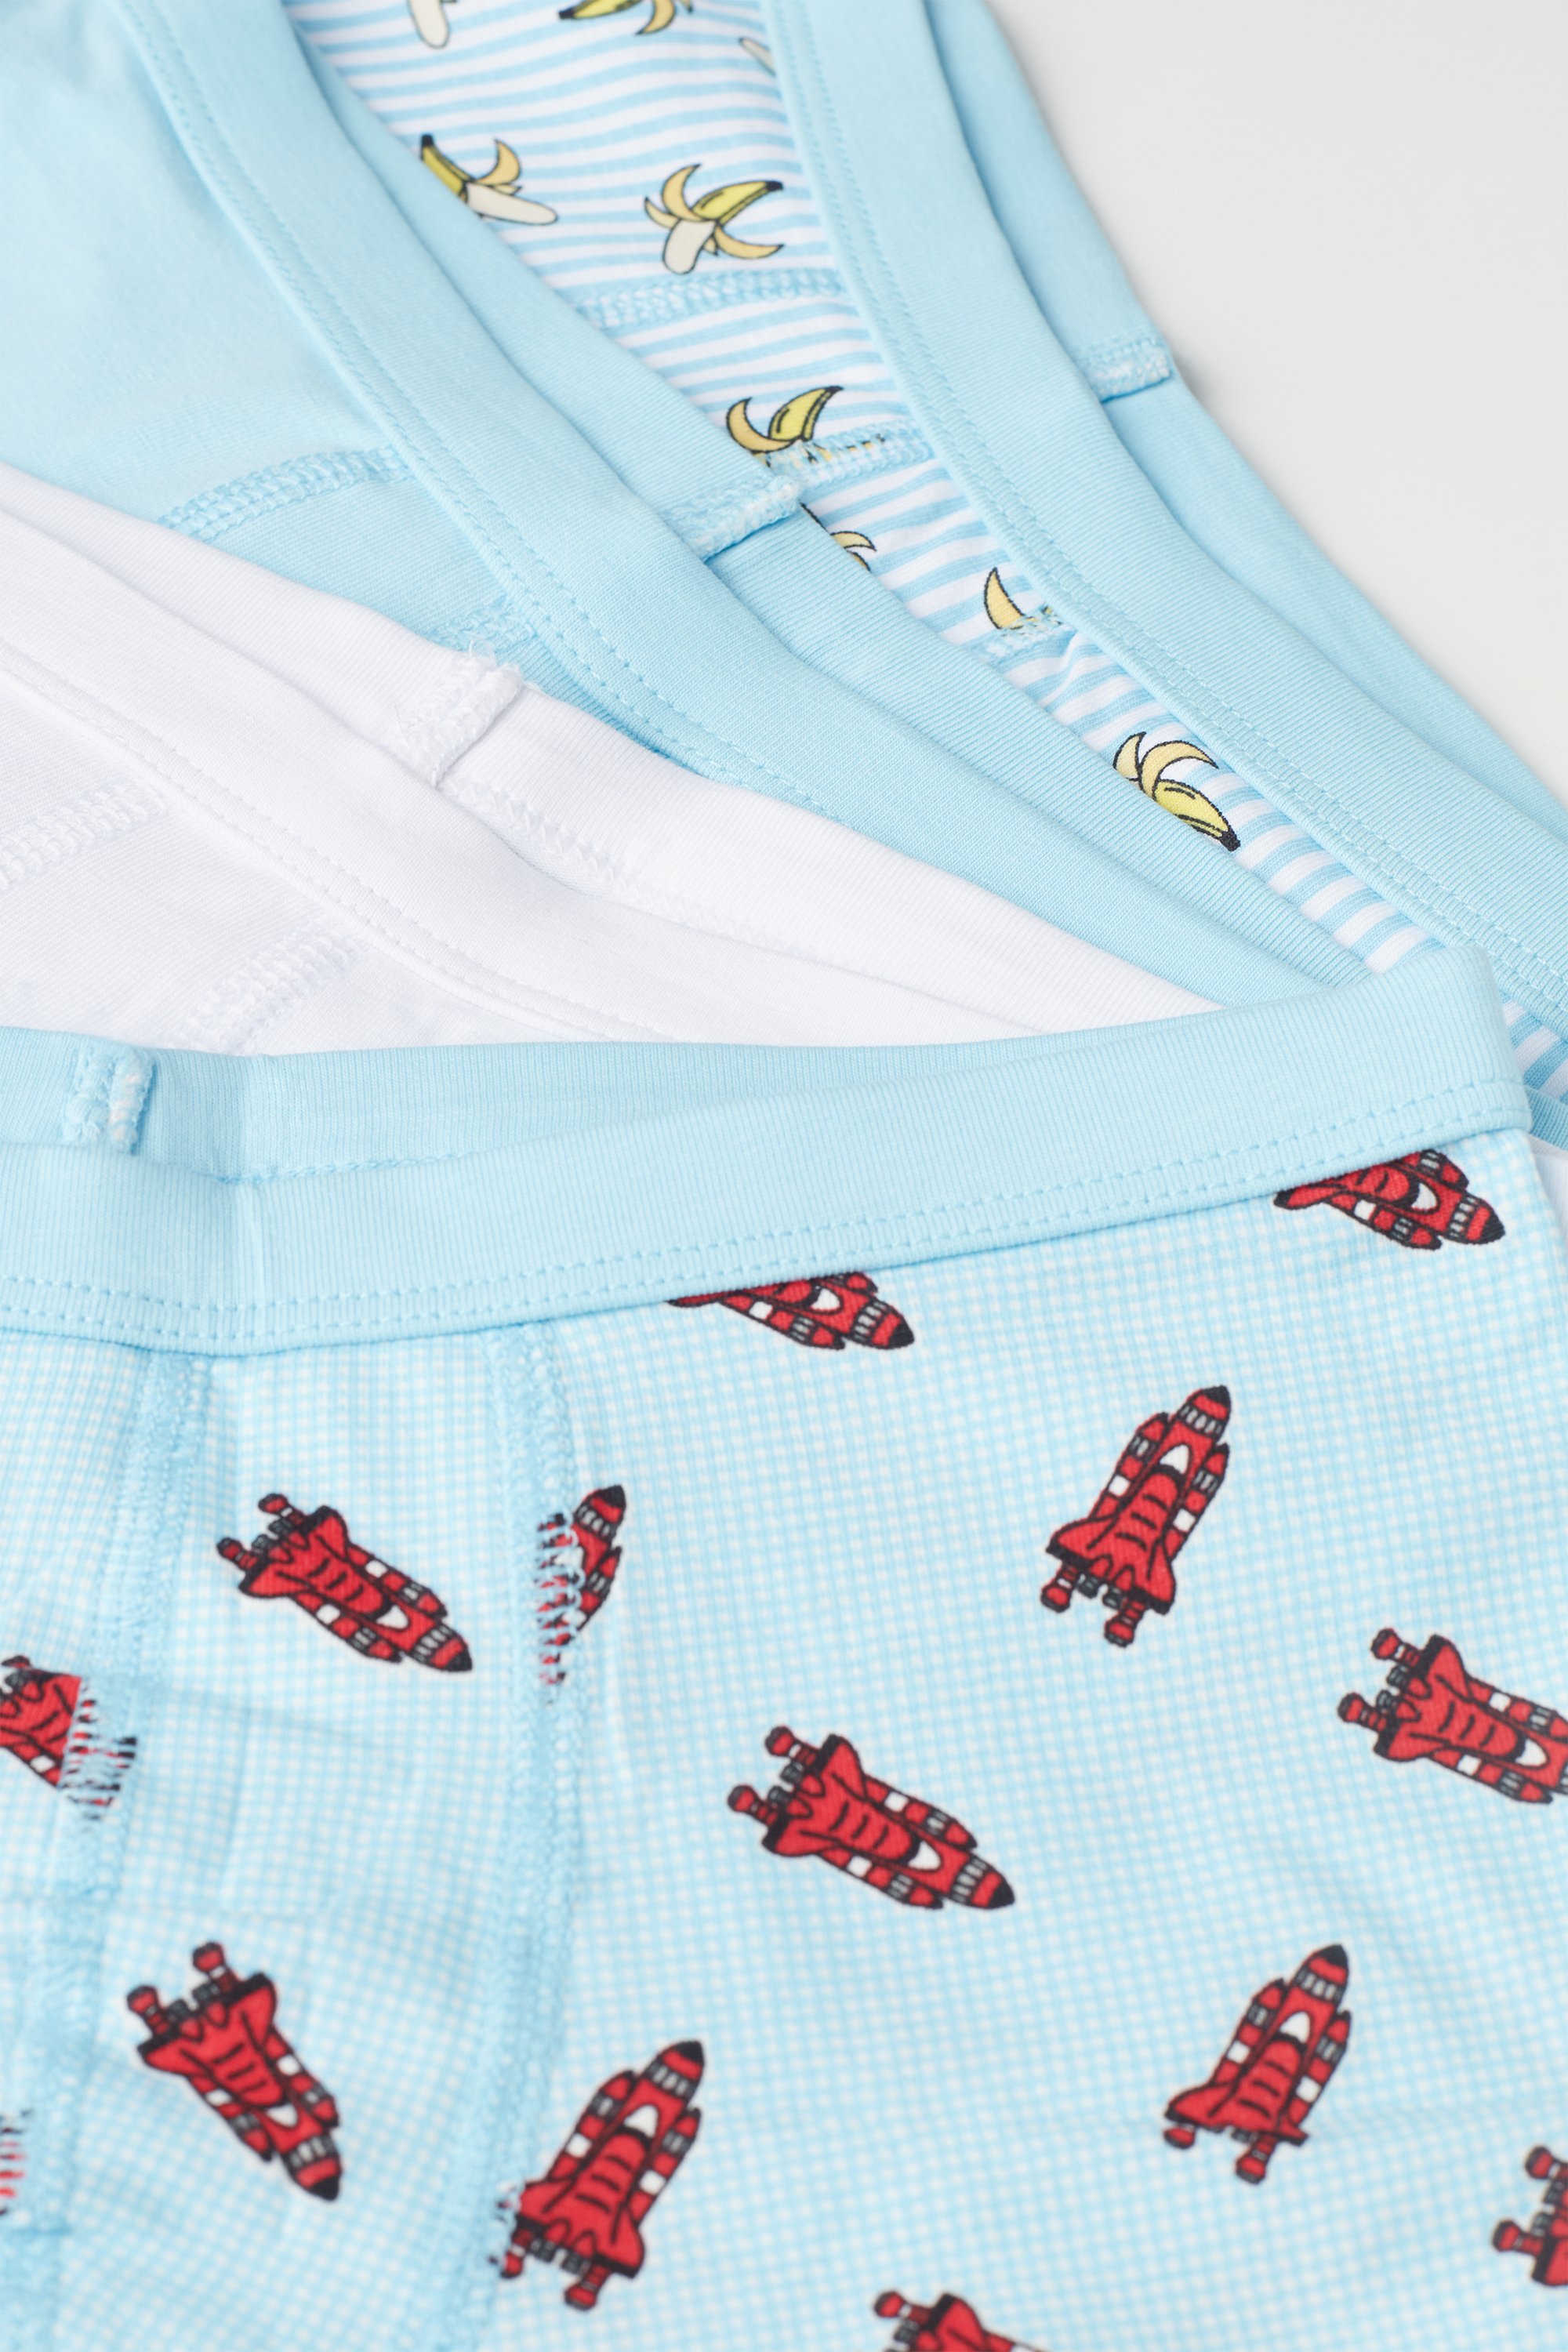 Pack of 4 Printed Cotton Boxers